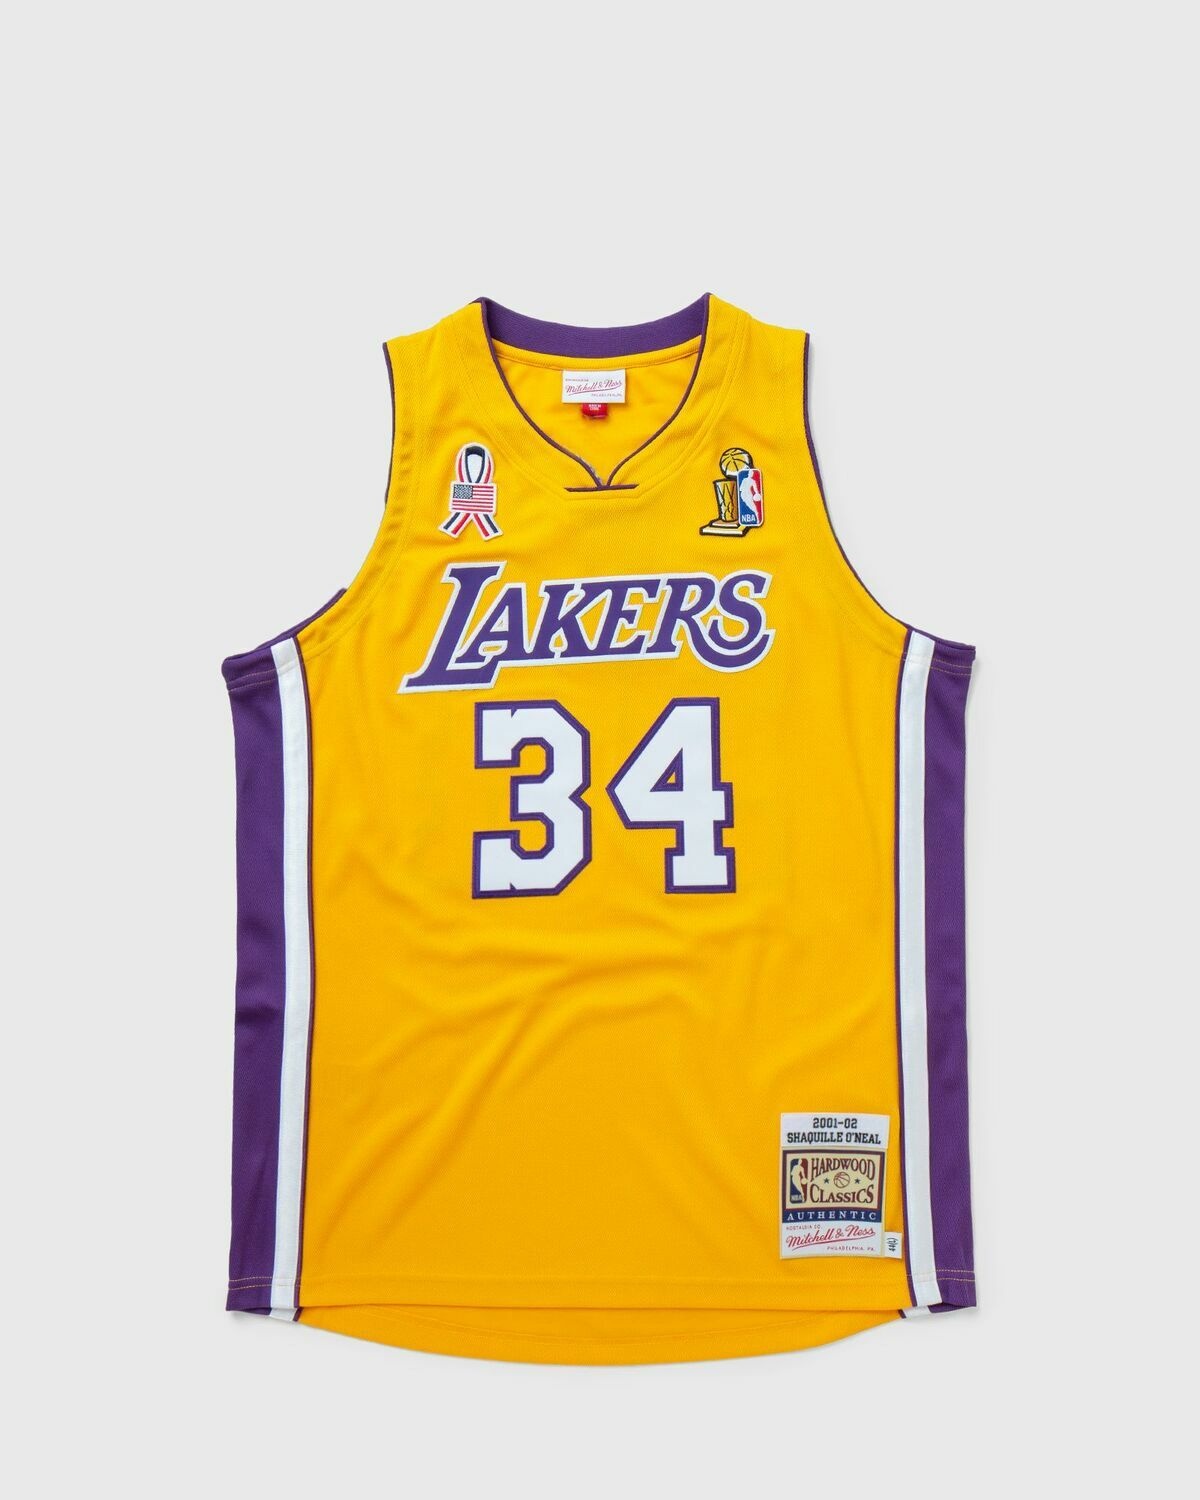 Mitchell & Ness Nba Authentic Jersey La Lakers 2001 02 Shaquille O'neal #34 Yellow - Mens - Jerseys